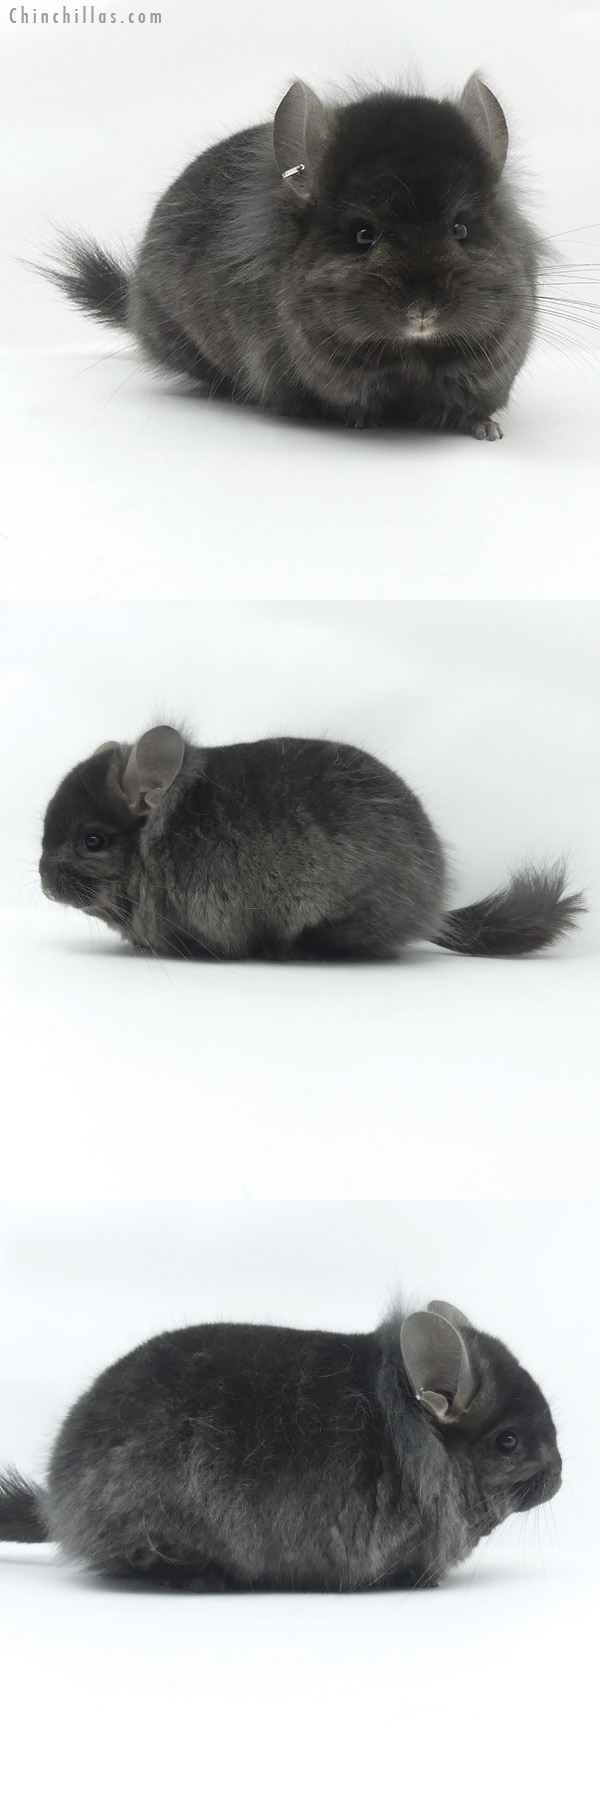 Chinchilla or related item offered for sale or export on Chinchillas.com - 20055 Exceptional Ebony ( Locken Carrier )  Royal Persian Angora Male Chinchilla with Lion Mane